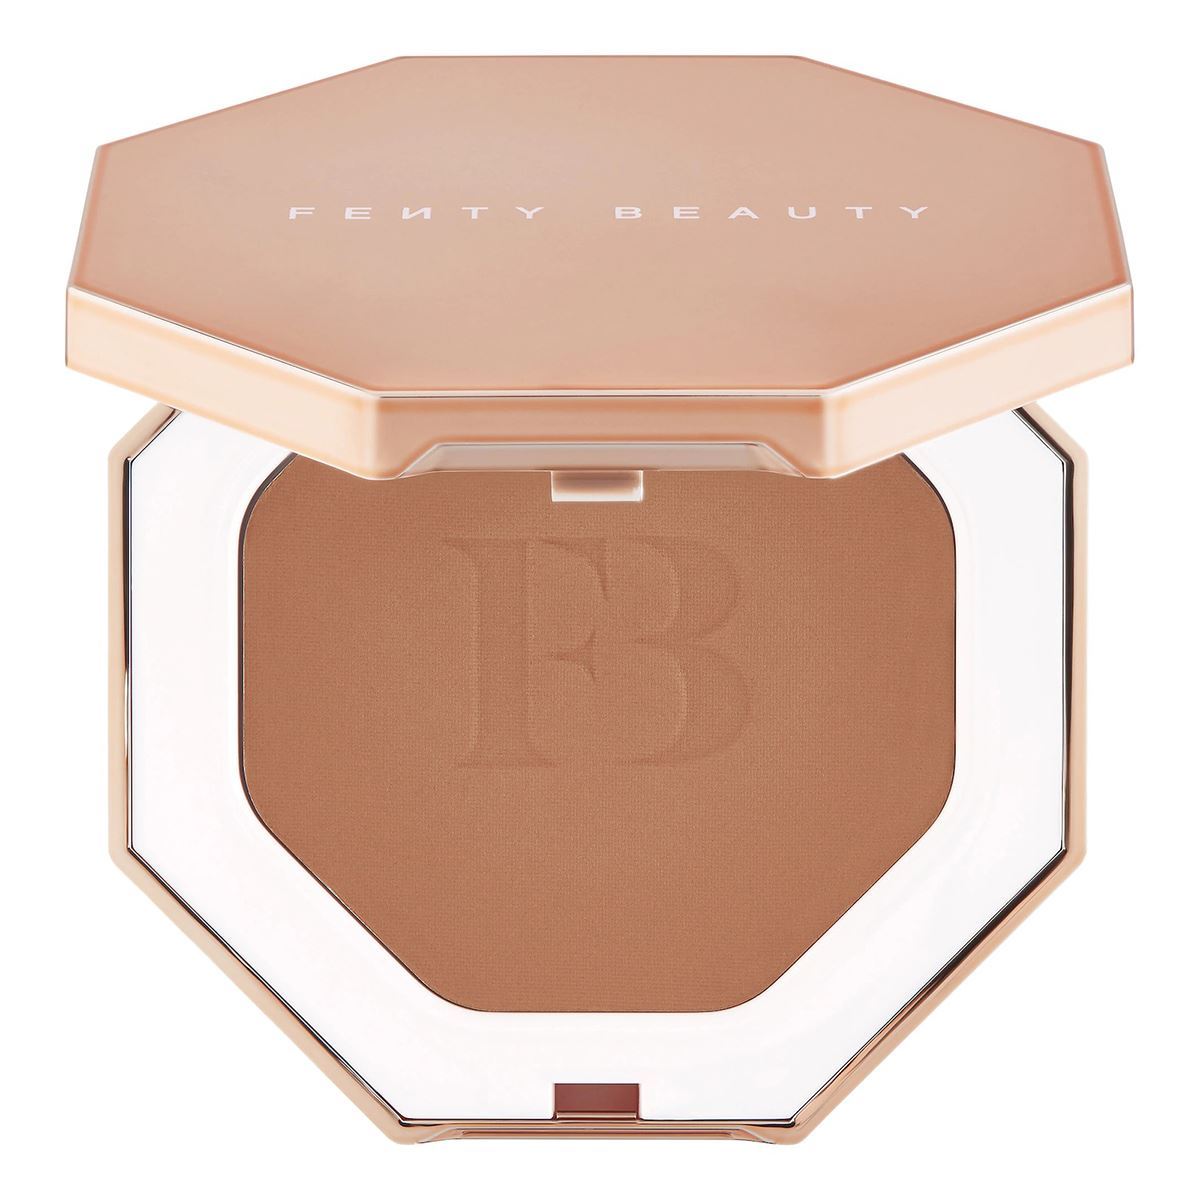 Picture of Fenty Beauty Bronzer